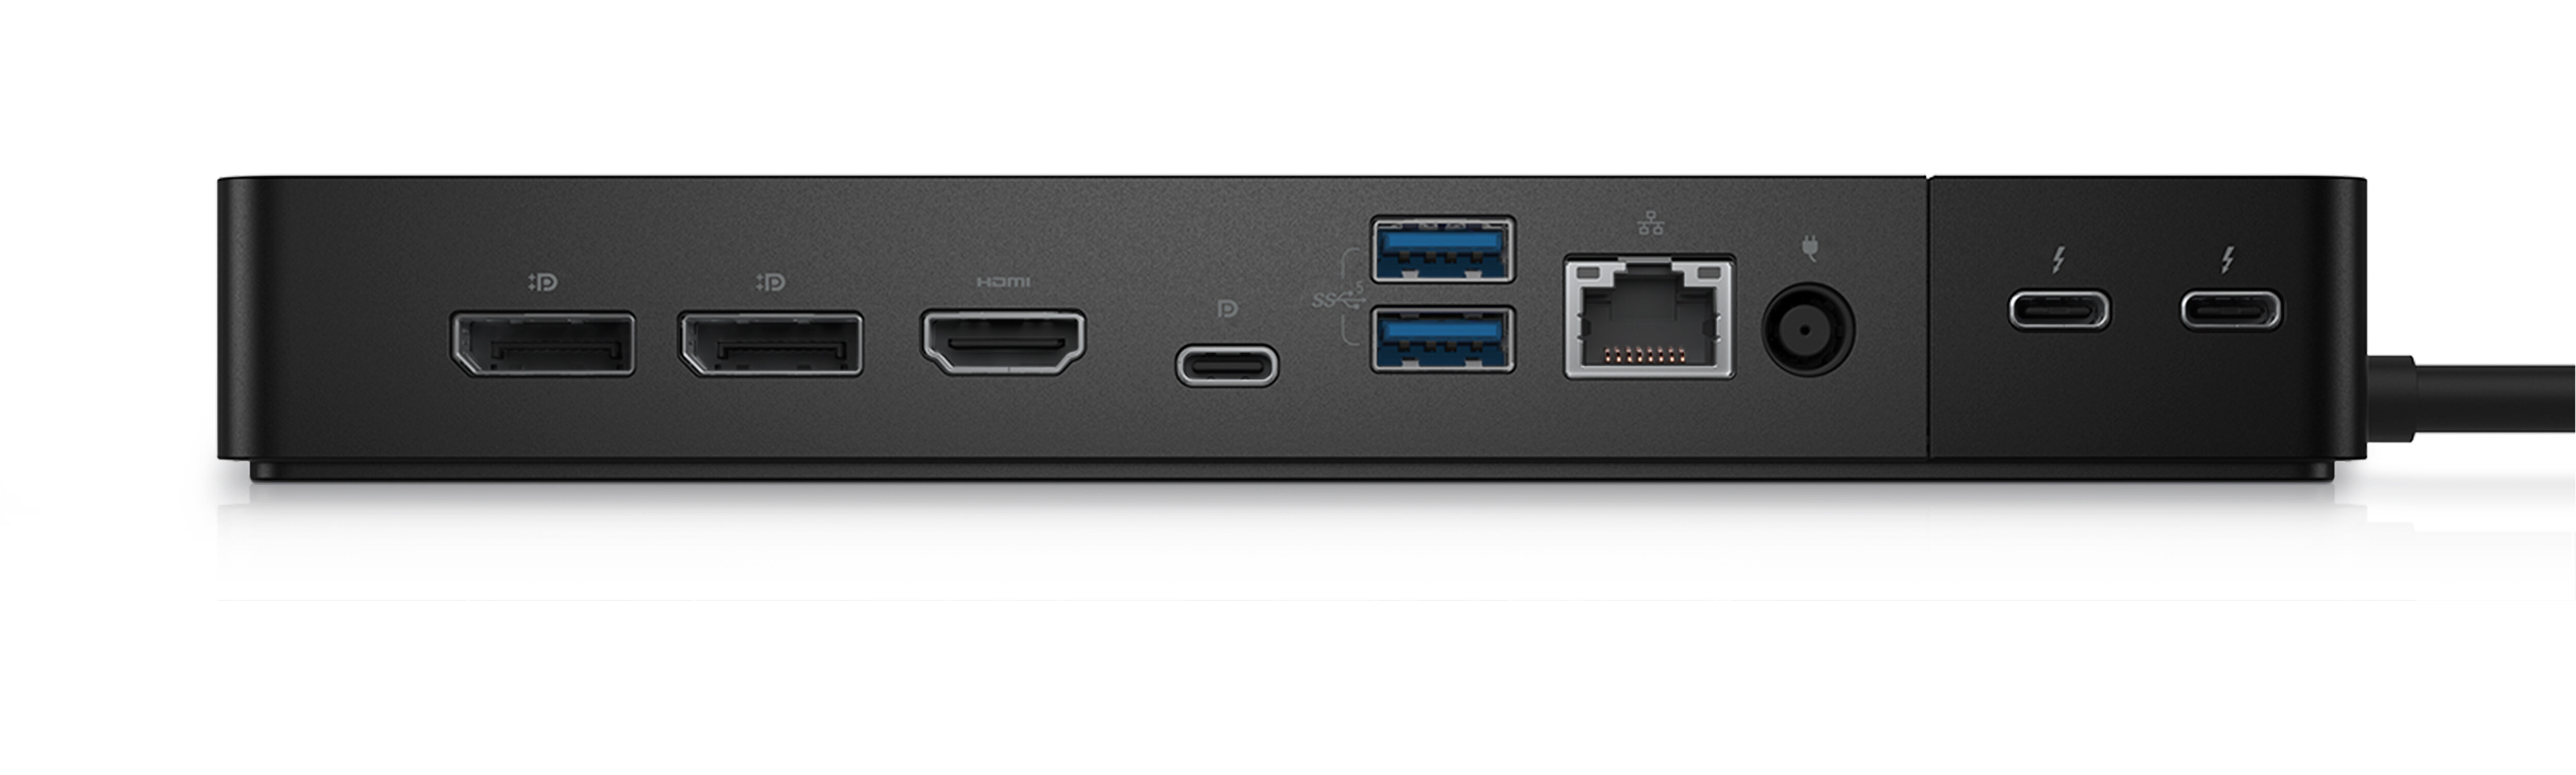 Dell docking station • Compare & find best price now »